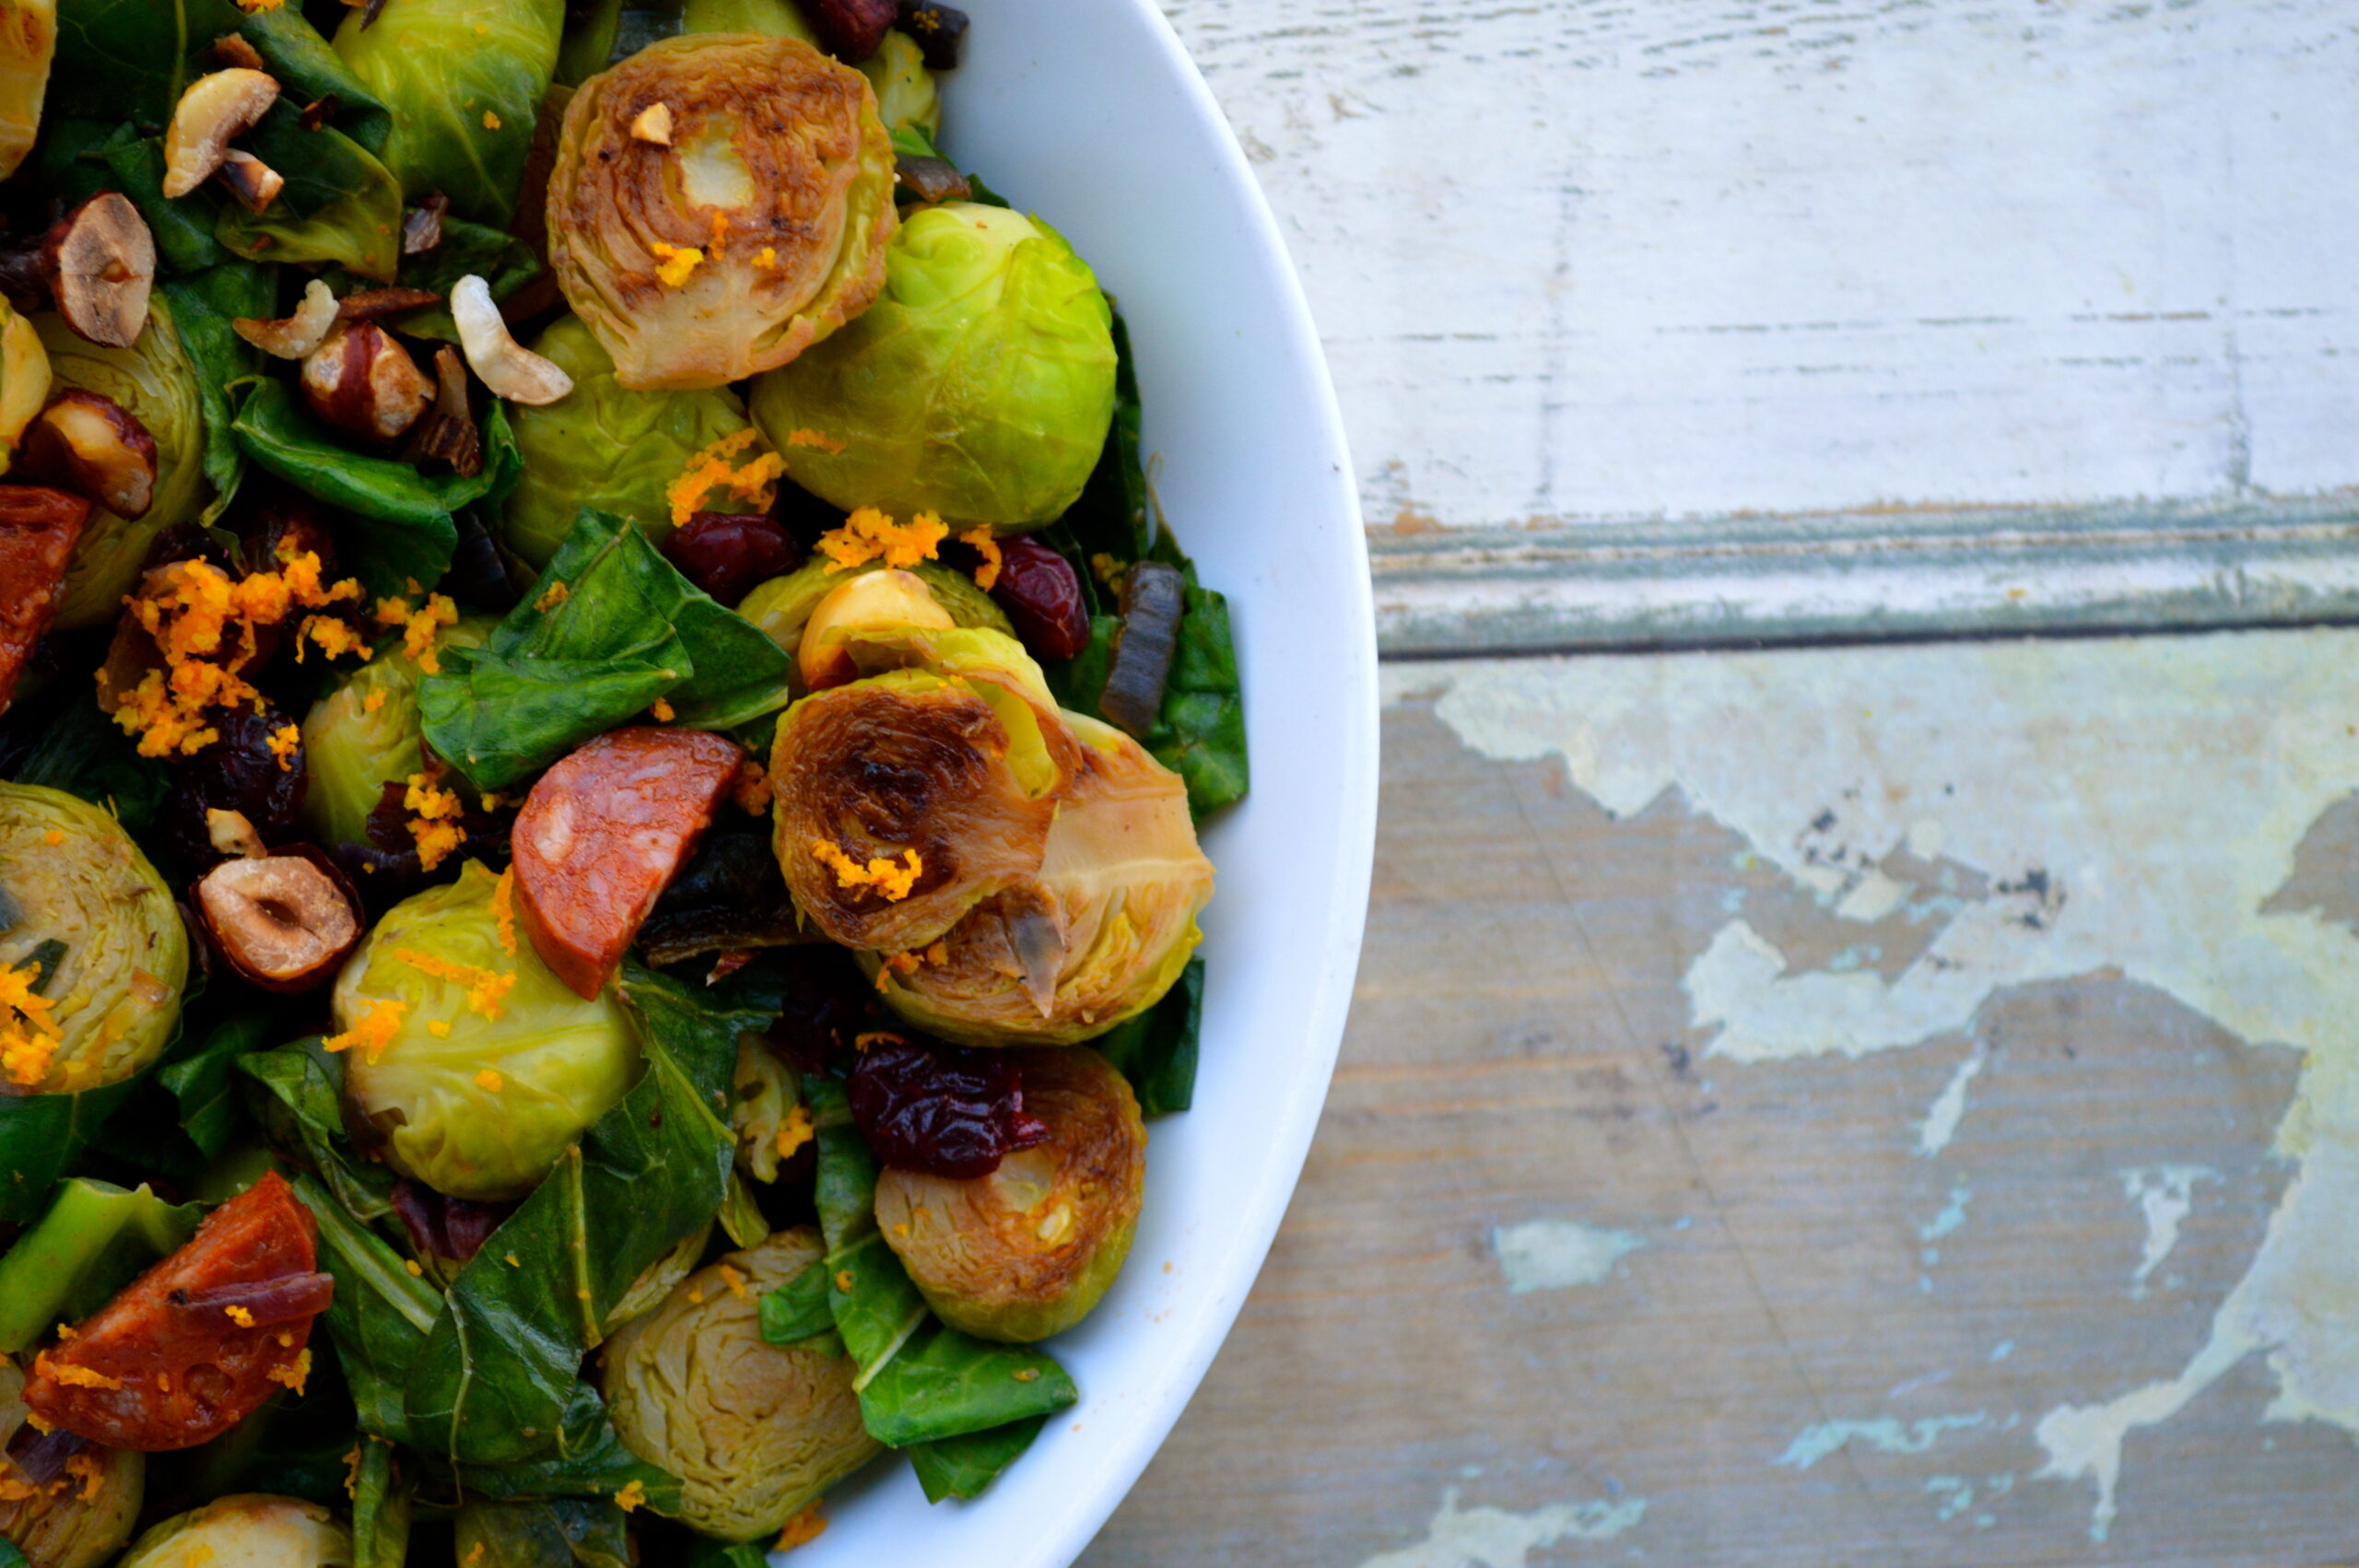 Pan-Fried Festive Sprouts With Orange, Chorizo, Cranberries and Hazelnuts